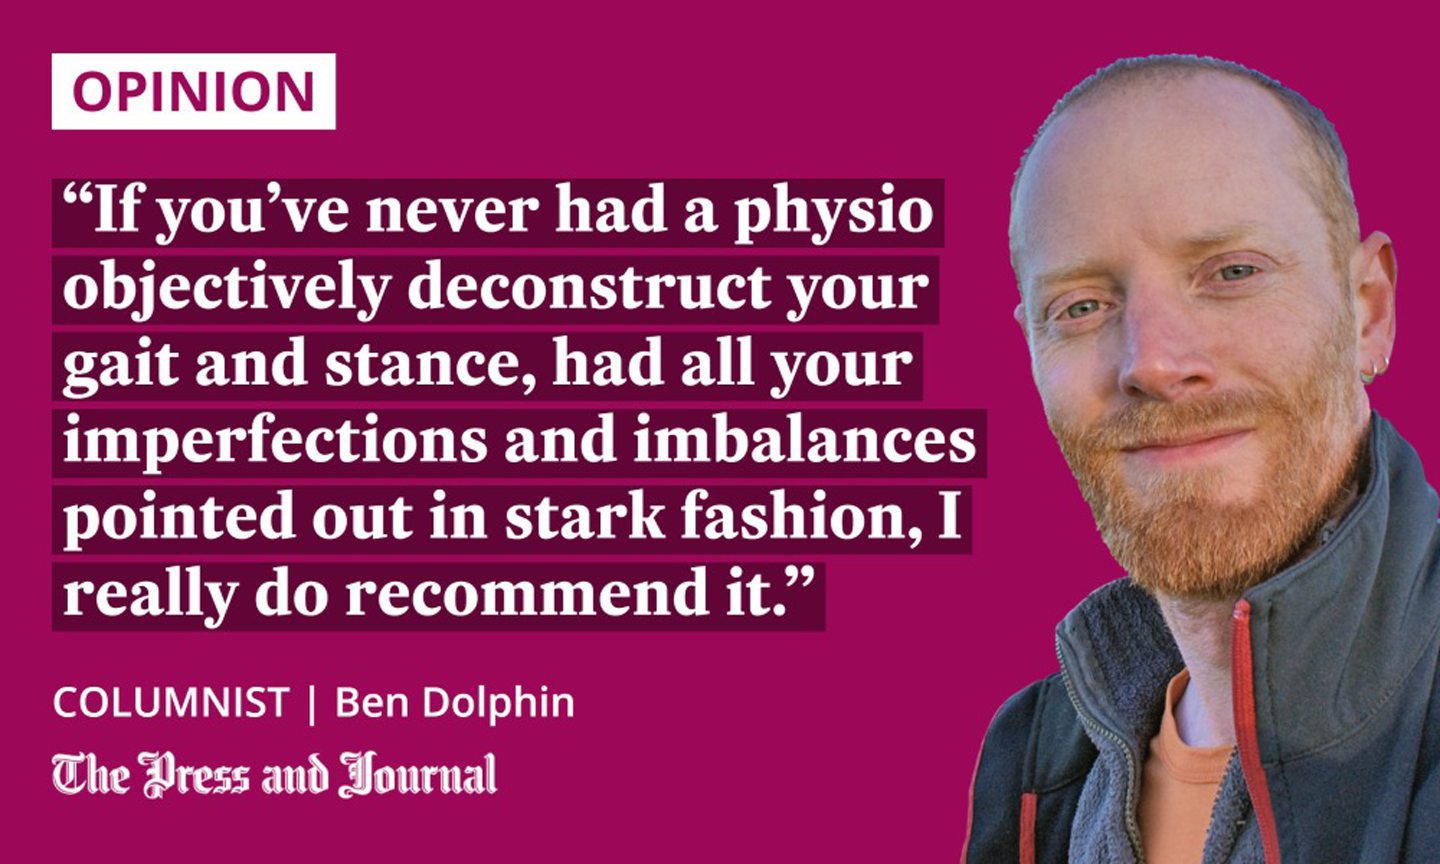 Columnist, Ben Dolphin speaks about knee injury types: "If you’ve never had a physio objectively deconstruct your gait and stance, had all your imperfections and imbalances pointed out in stark fashion, I really do recommend it."